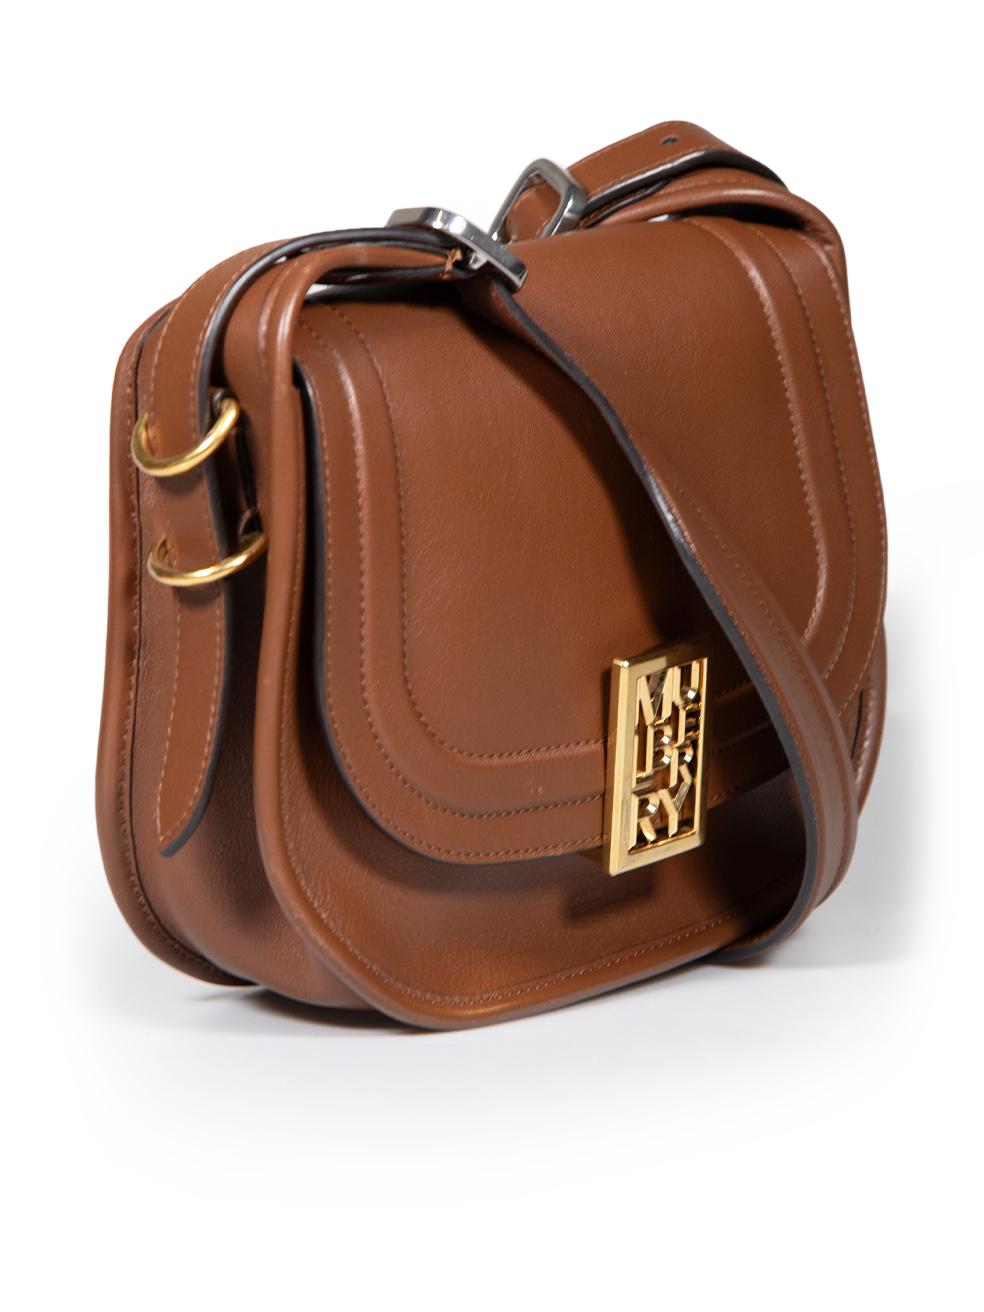 CONDITION is Very good. Minimal wear to bag is evident. Minimal wear to hardware with scratches seen as well as a small mark on the back is seen on this used Mulberry designer resale item.
 
 
 
 Details
 
 
 Model: Sadie
 
 Brown
 
 Calf leather
 
